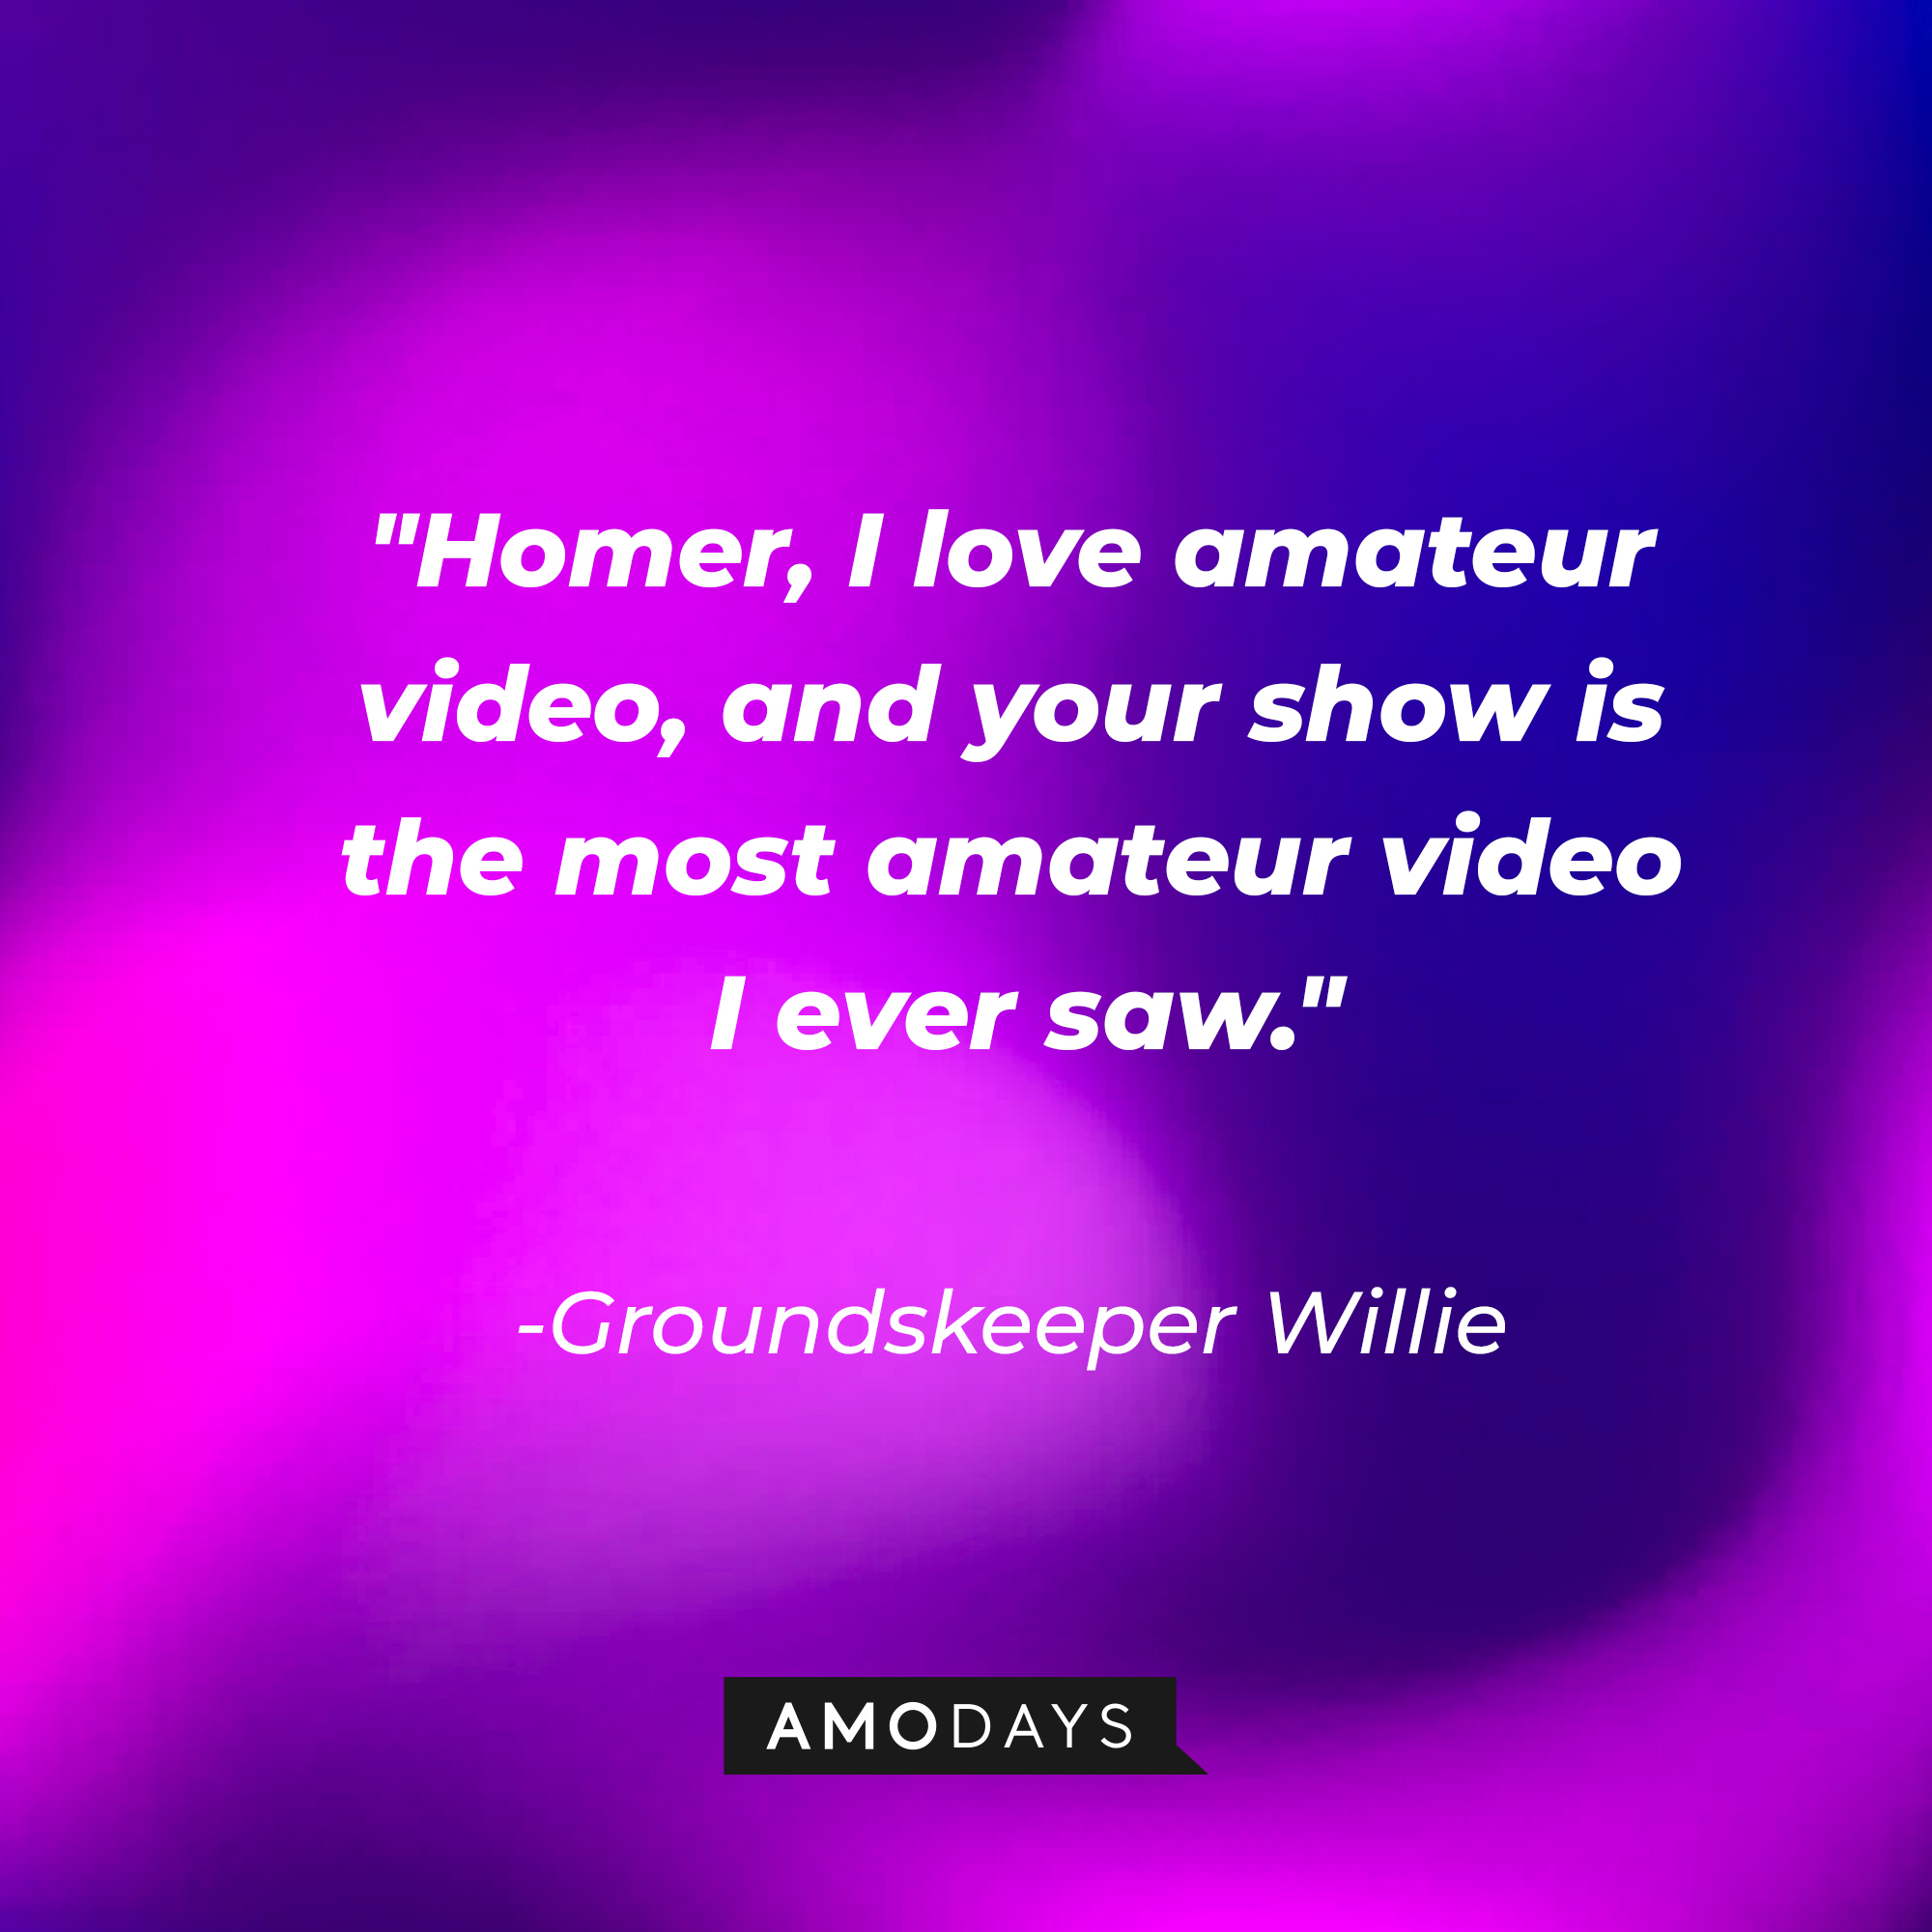 Groundskeeper Willie's quote: "Homer, I love amateur video, and your show is the most amateur video I ever saw." | Source: AmoDays